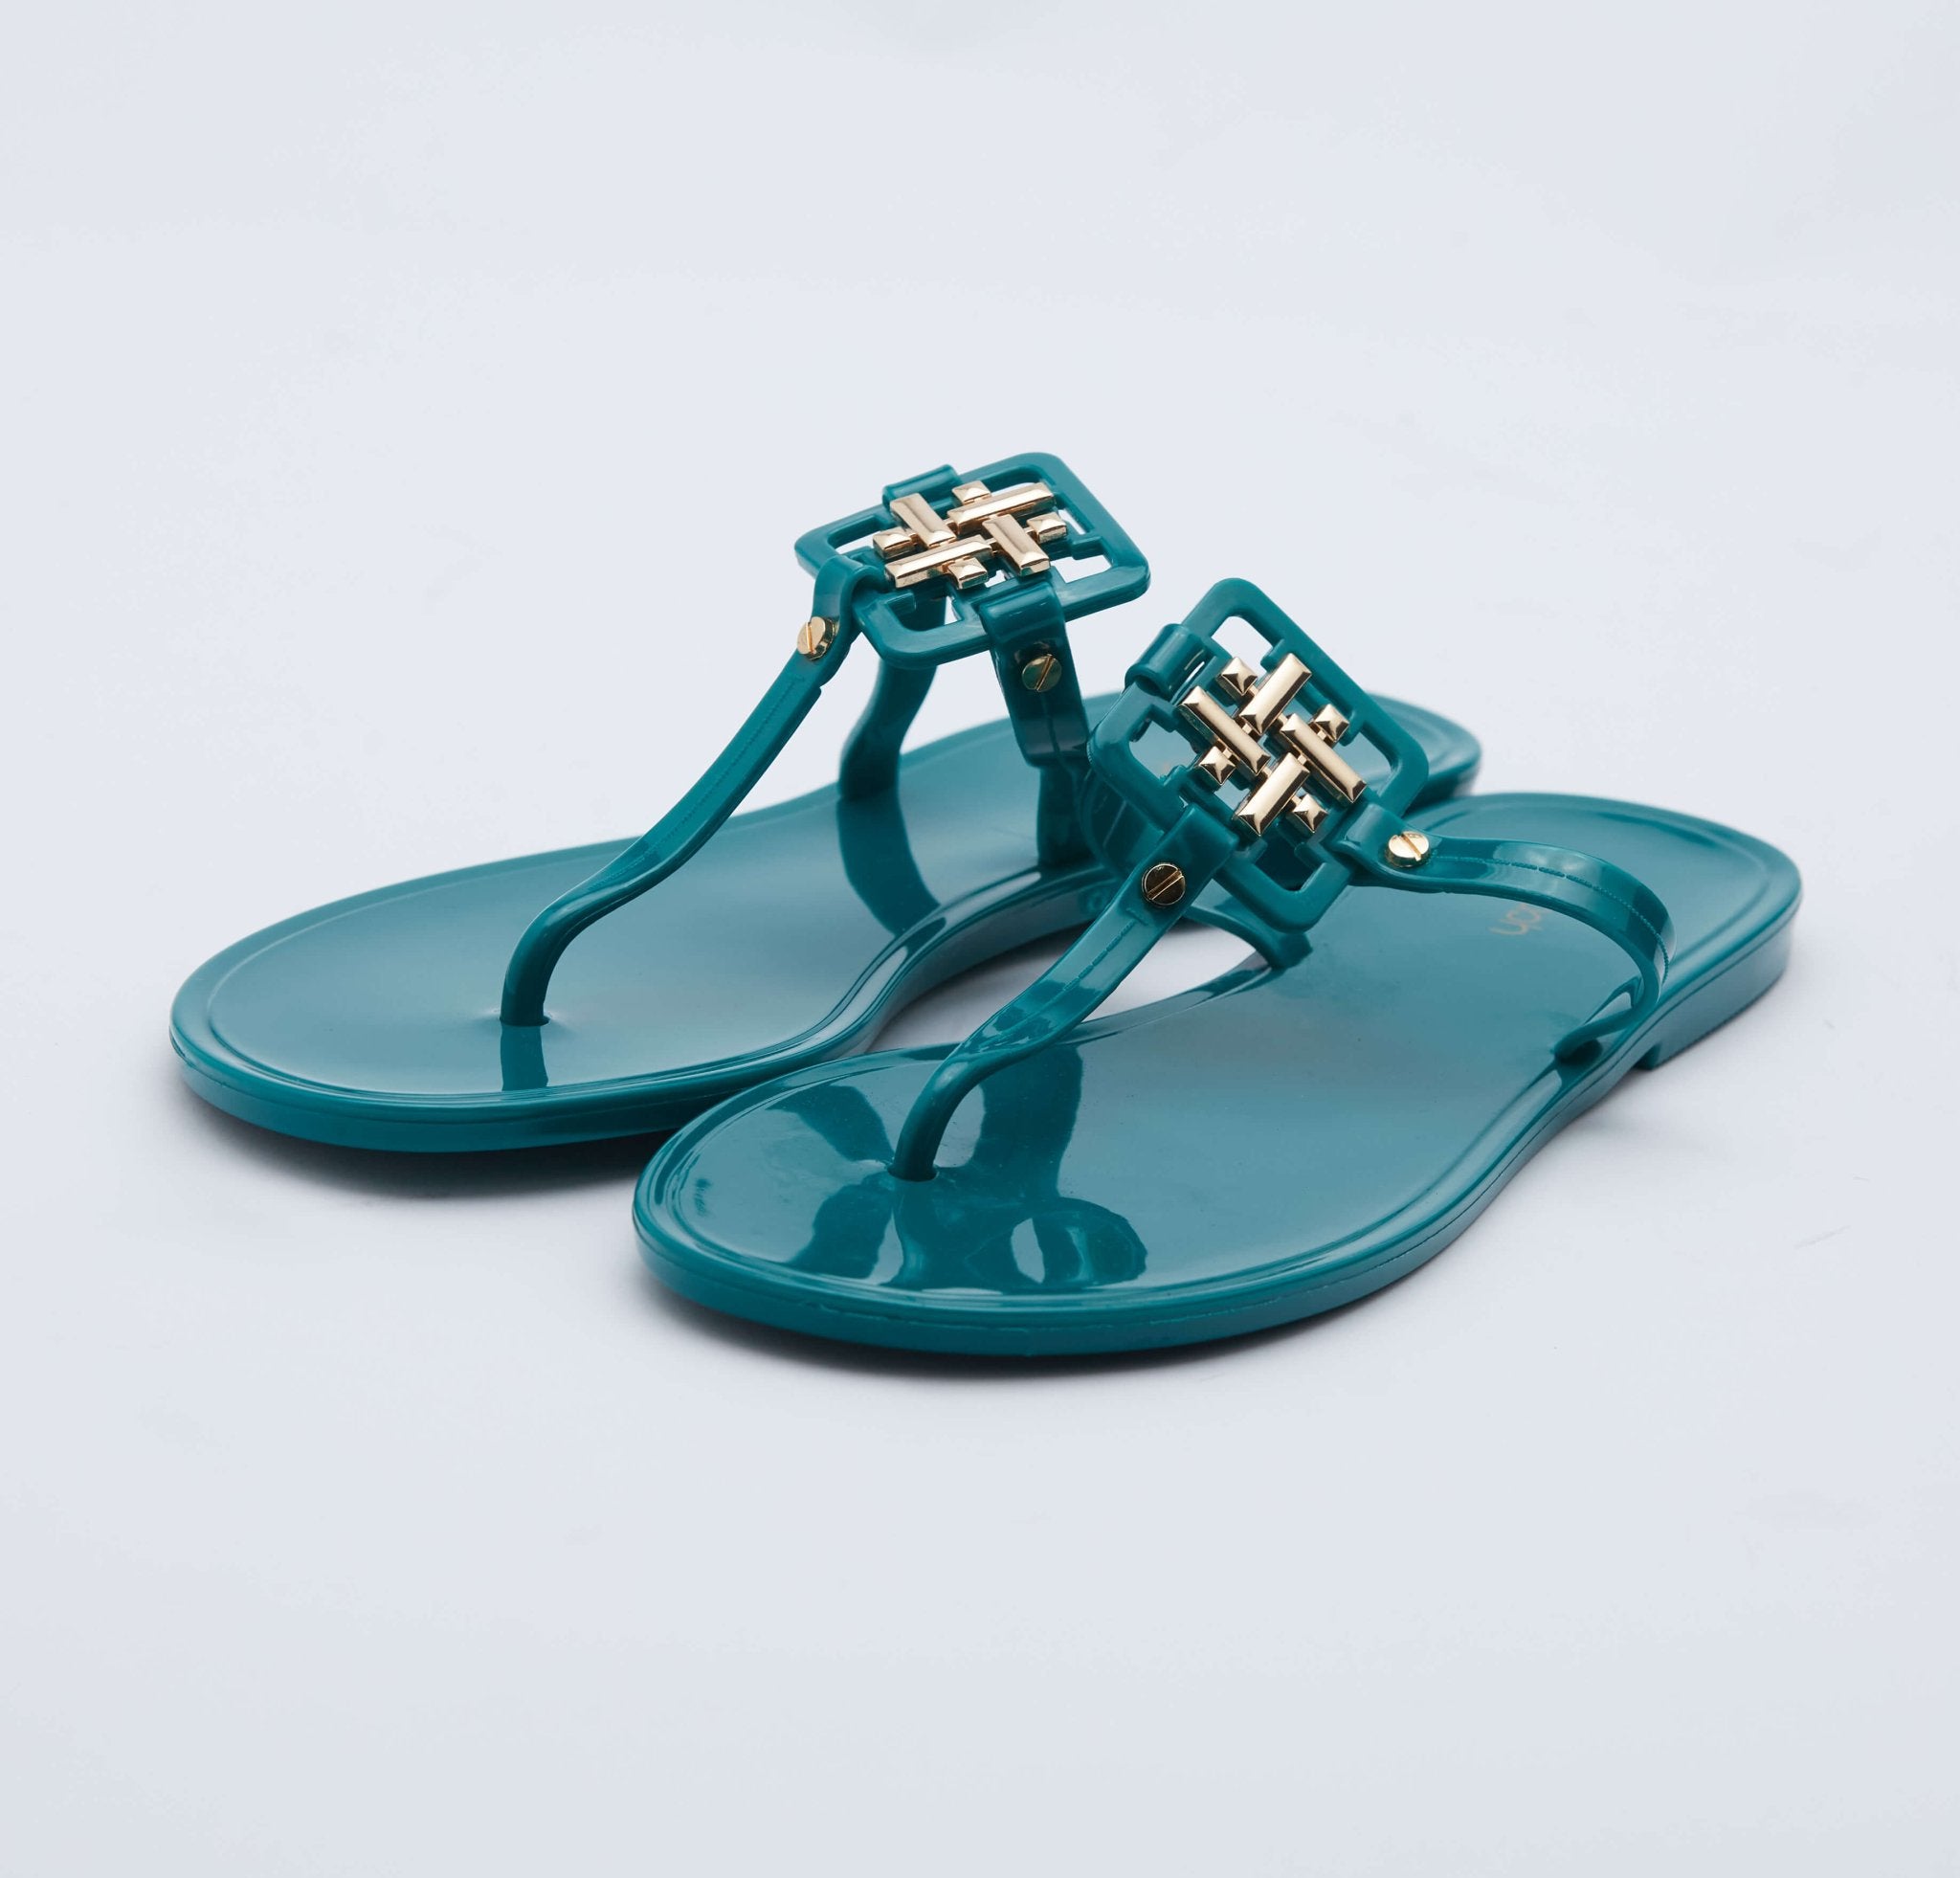 Outslay Jelly Slides in Green - Outlash brand